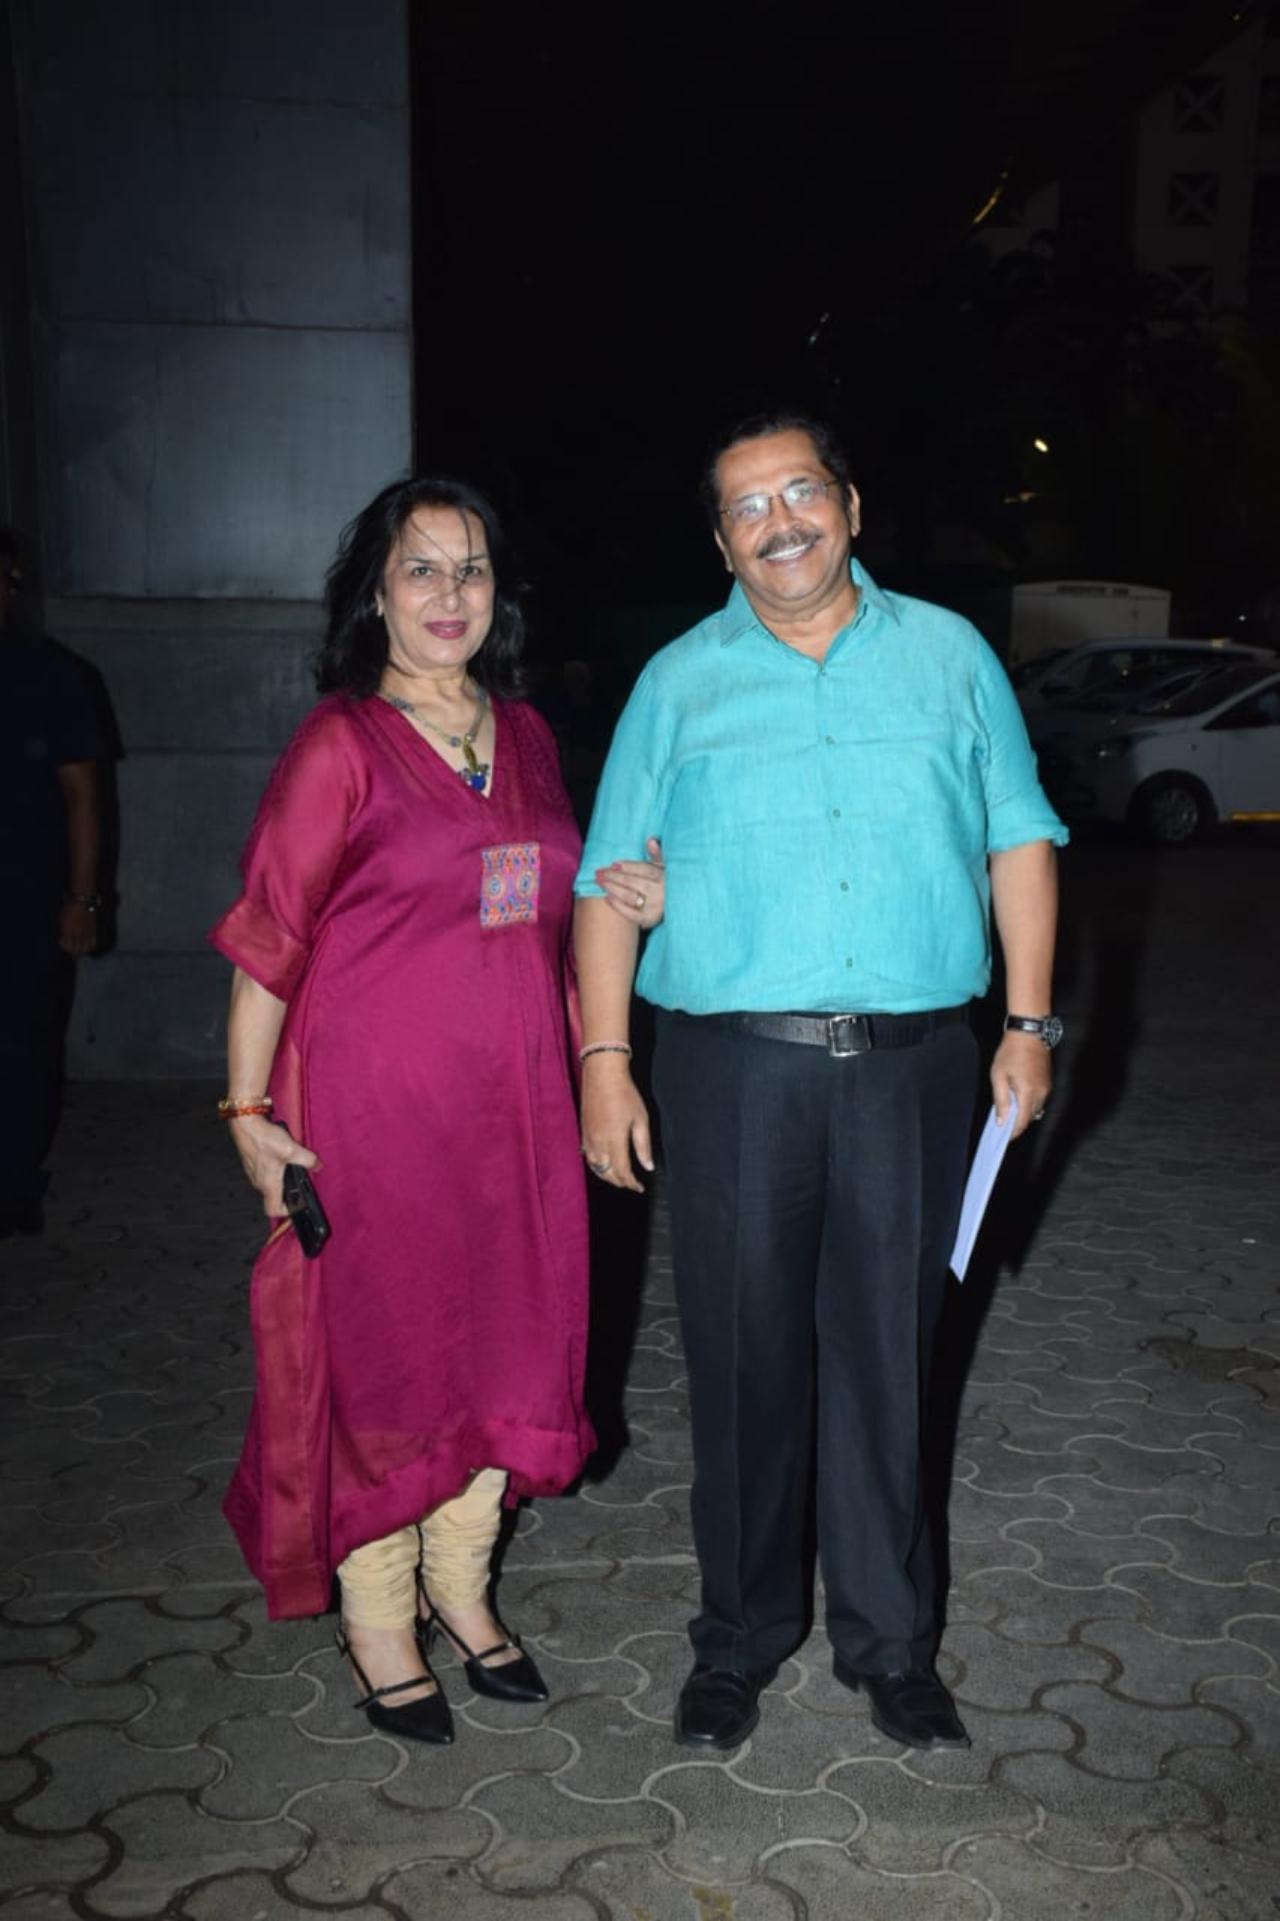 Tiku Talsania arrived for the screening with his wife. The actor was all smiles for the paparazzi before heading in for the screening